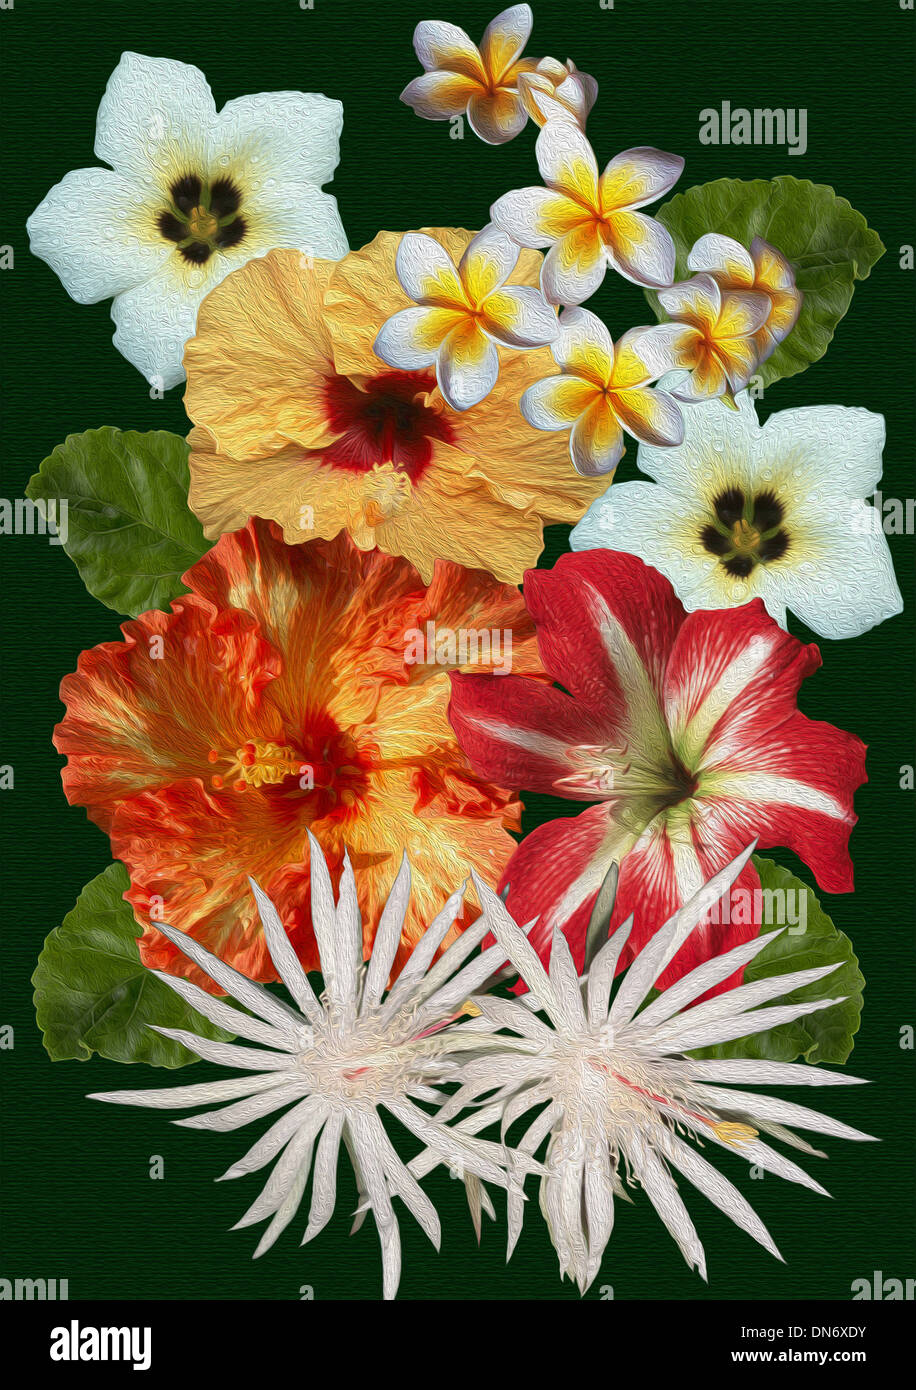 Unique digital floral art design with orange hibiscus, frangipani, red hippeastrums, and white turnera flowers and foliage on black background Stock Photo